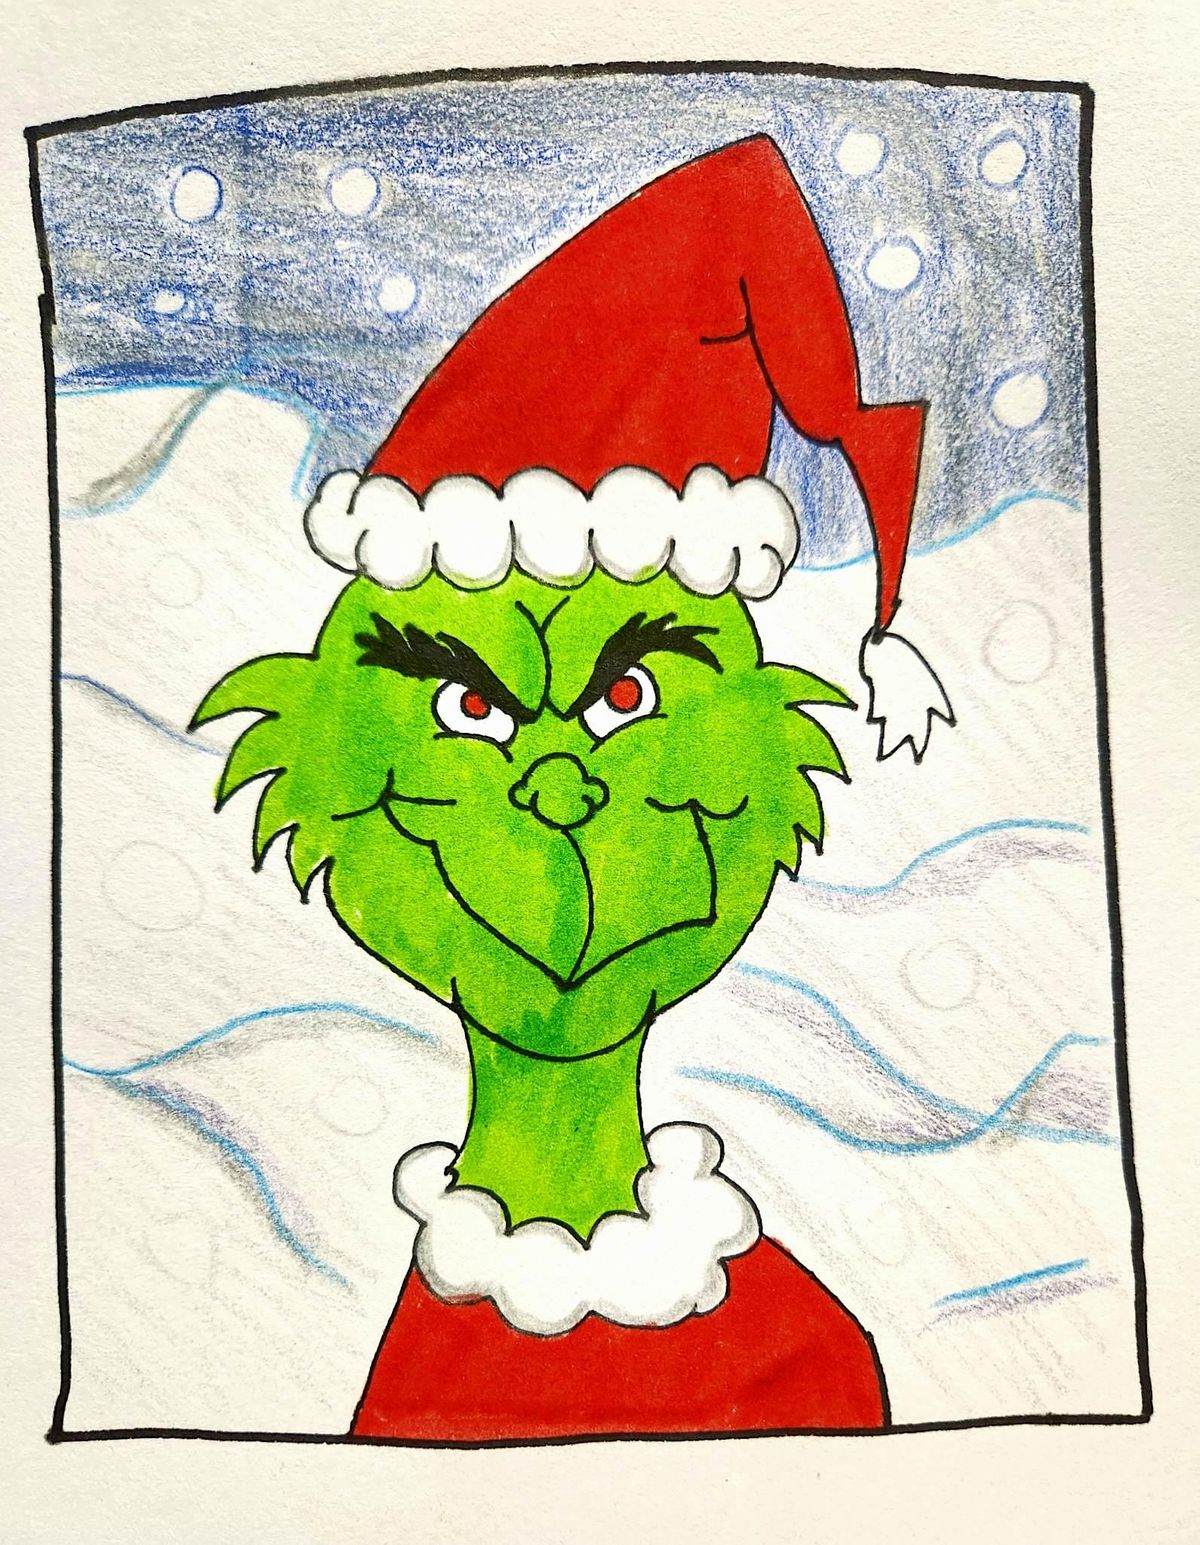 Grinch Paint and Sip 